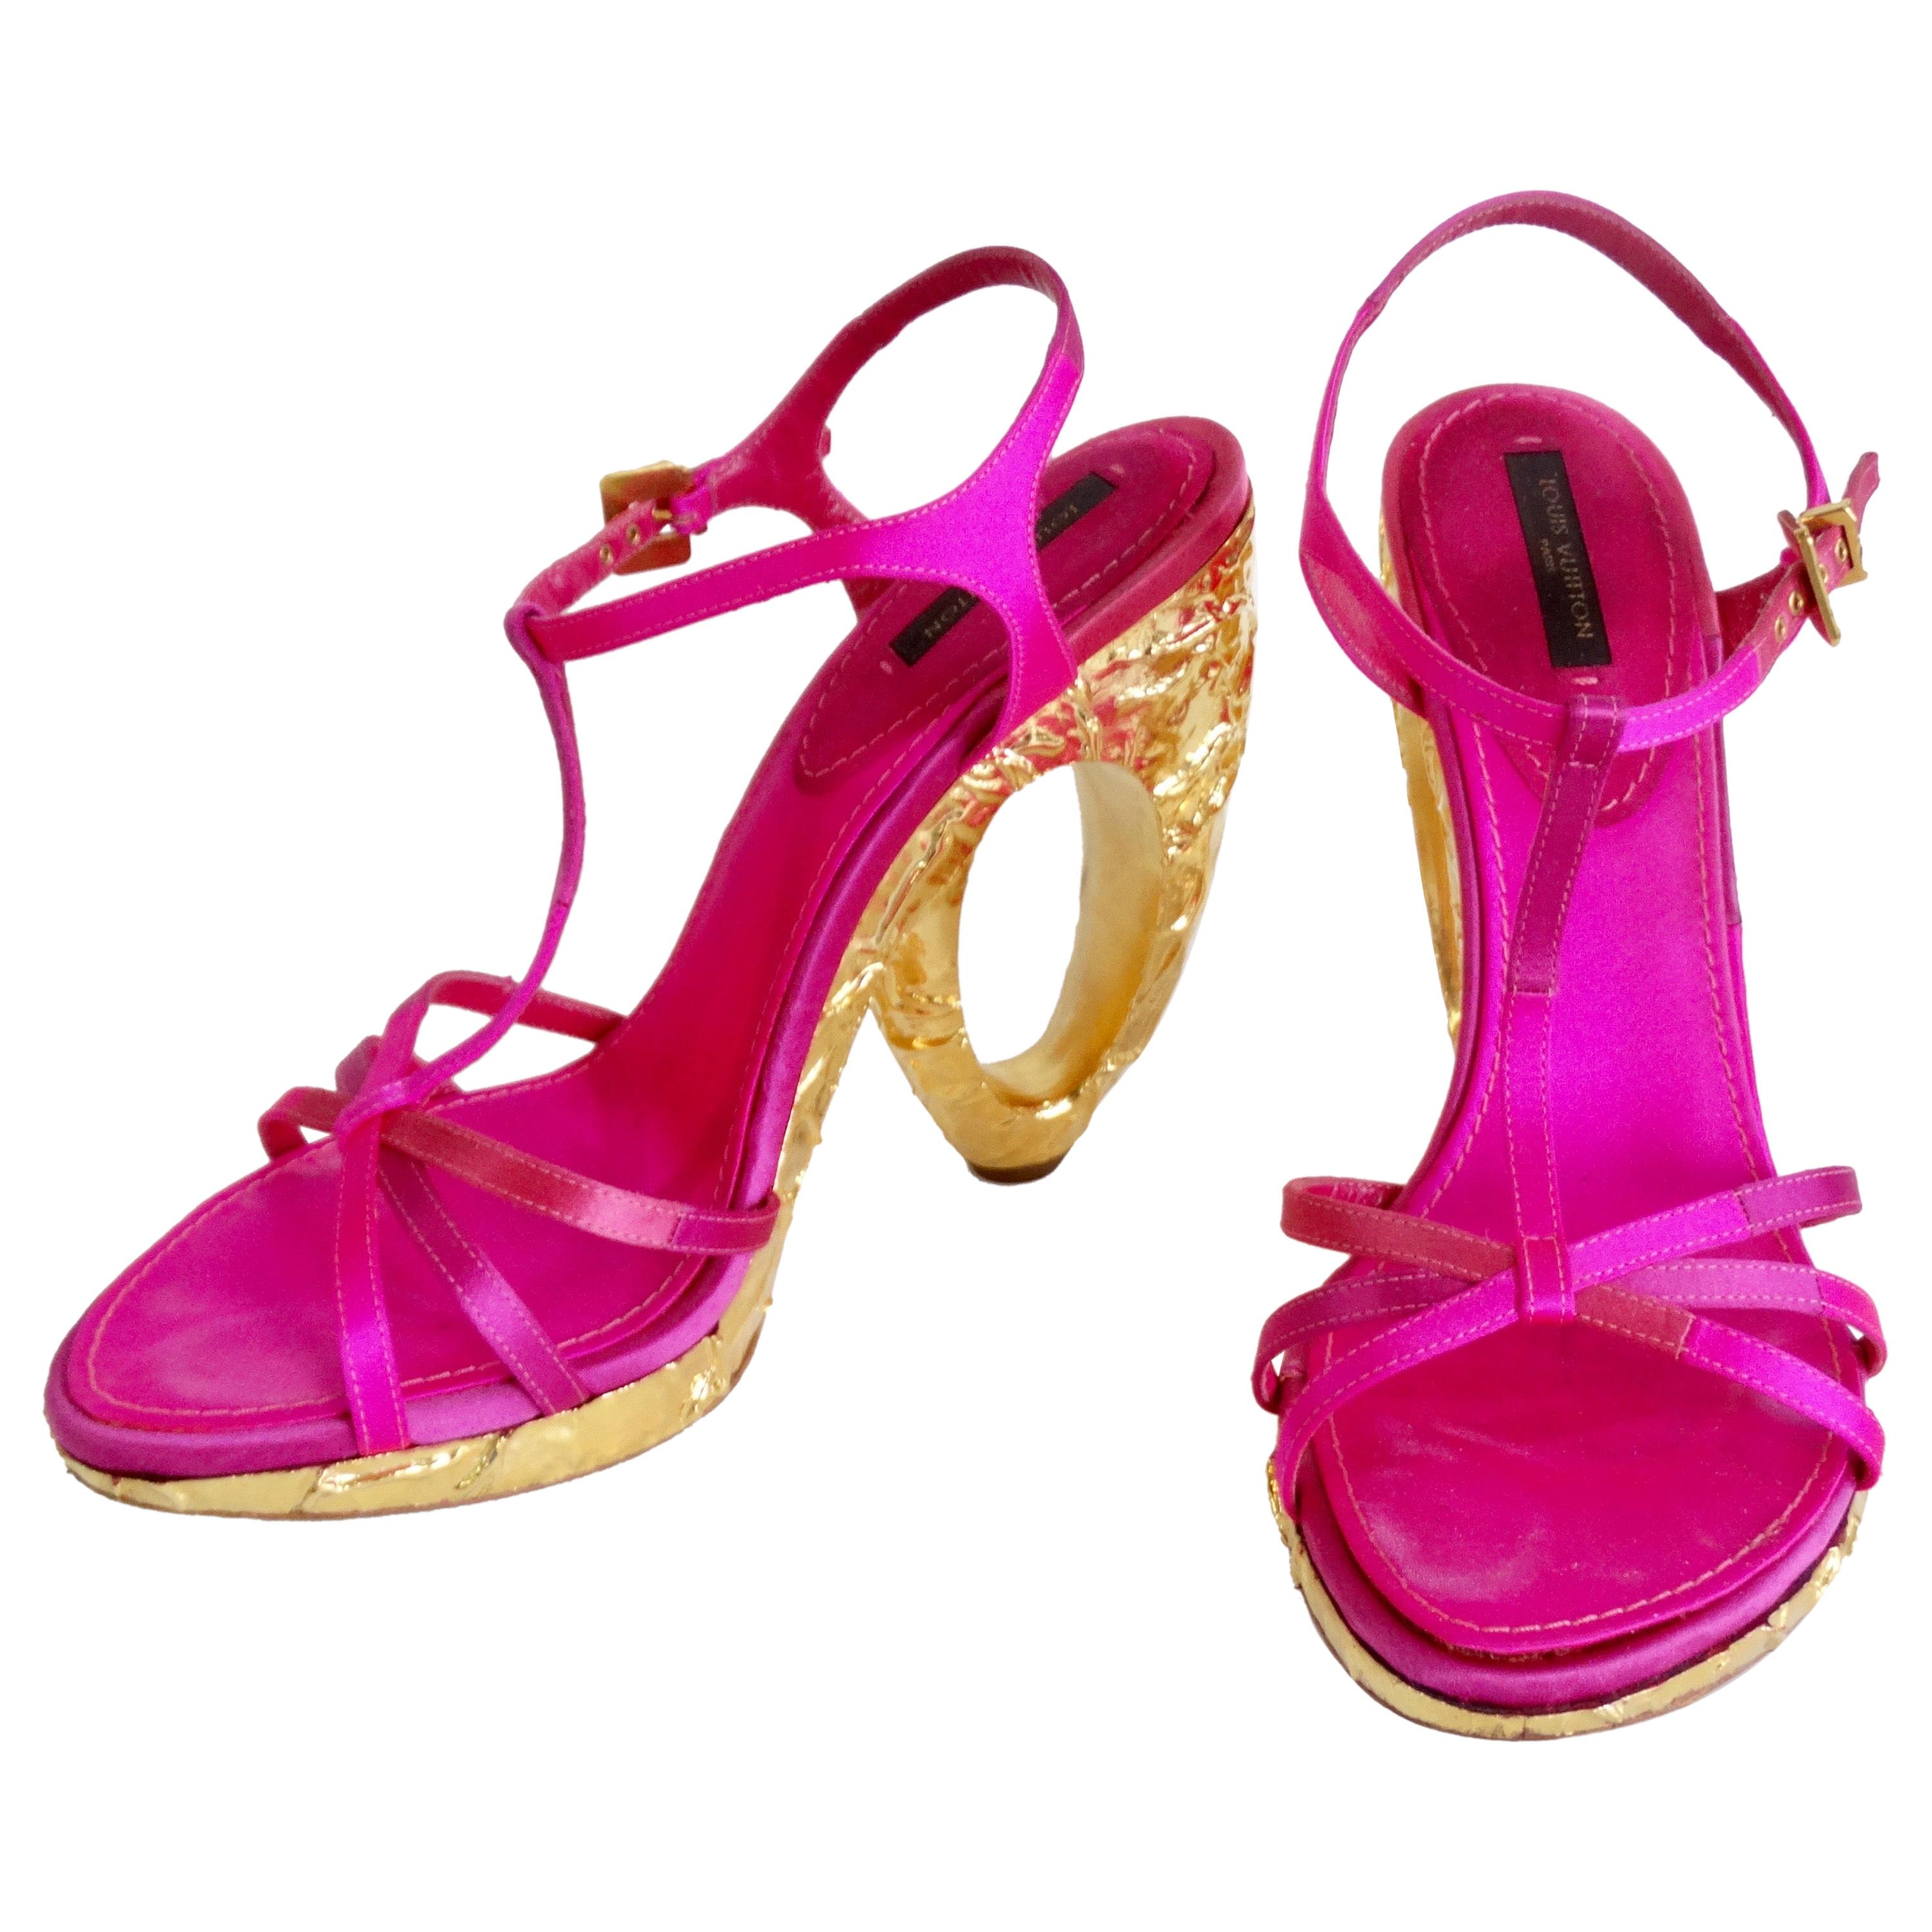 Louis Vuitton 2000s Fuchsia Satin Pumps With Textured Gold Heels For Sale